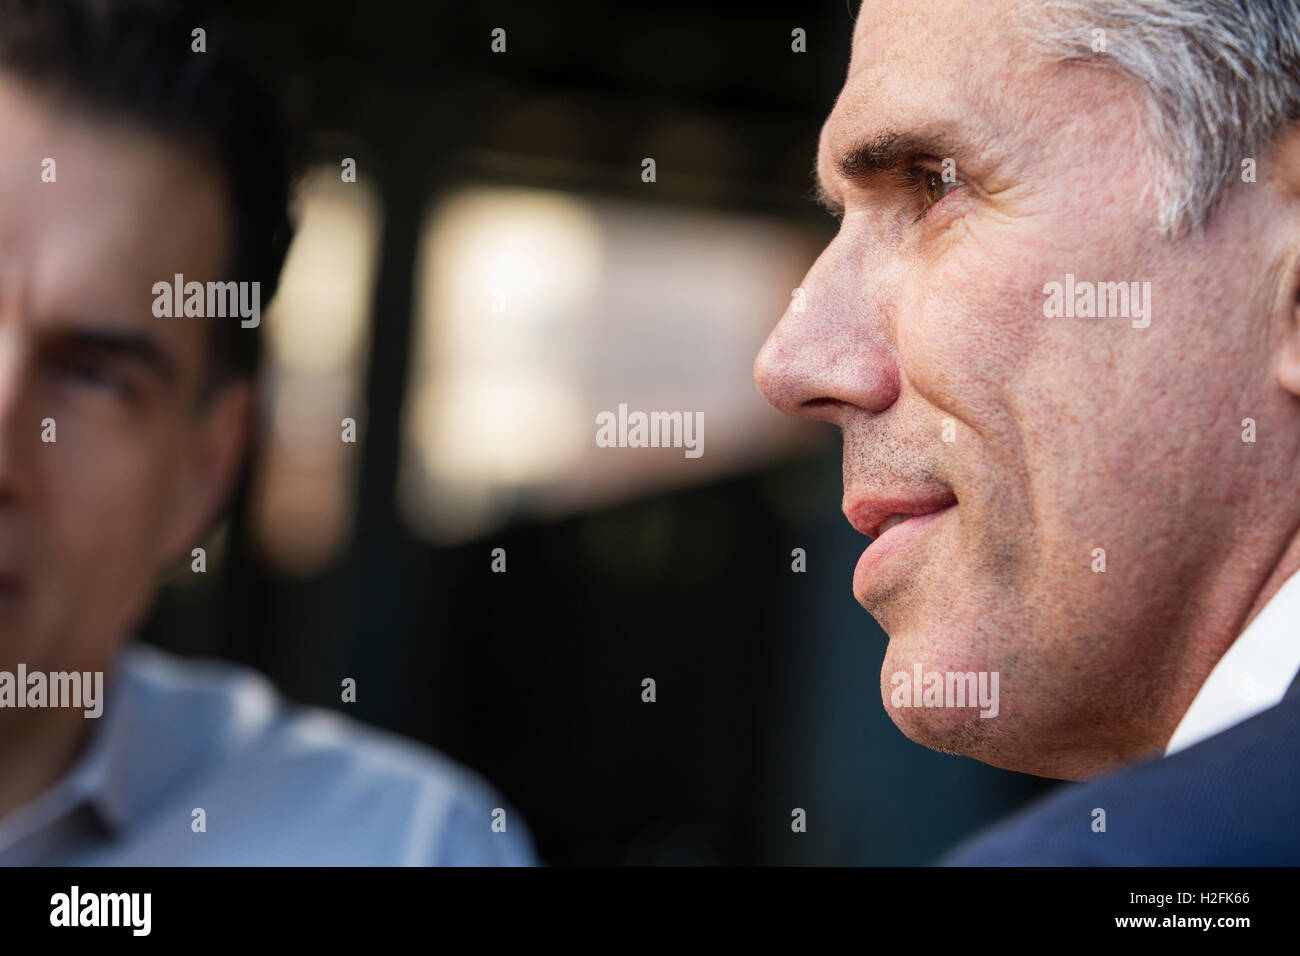 Two men on  a street, one looking sideways and one partly visible, head and shoulders, Stock Photo